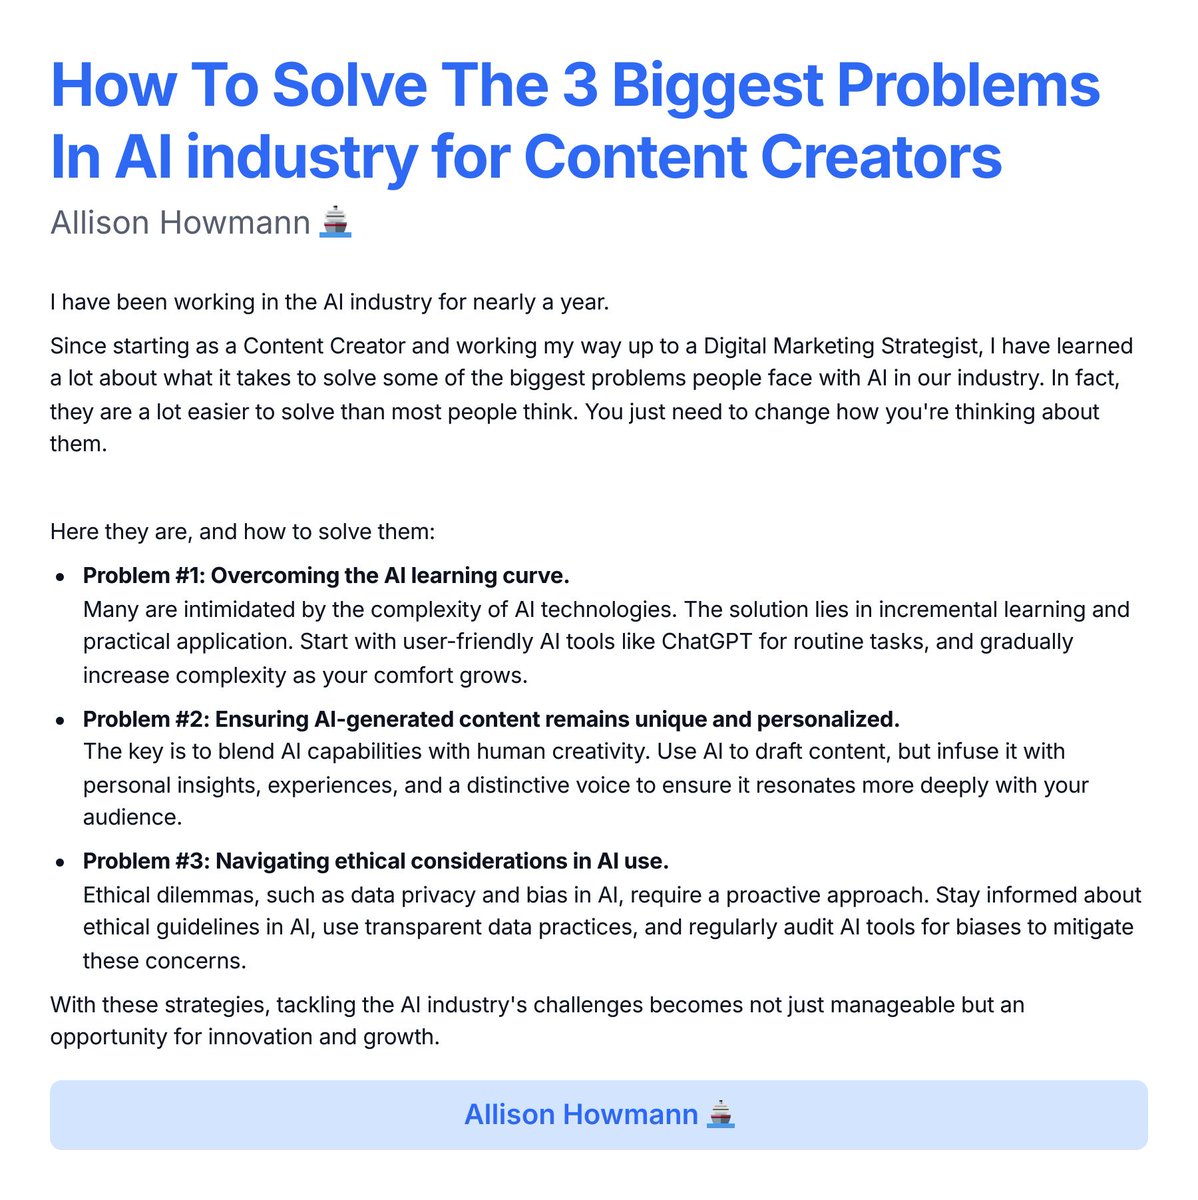 How To Solve The 3 Biggest Problems In AI industry for Content Creators #AIChallenges #ContentCreationInnovation #DigitalMarketingStrategies #AIforContentCreators #AIIndustrySolutions #EthicalAIUse #AIPersonalizationTips #AIAdvancement #CreativeAIContent #DataPrivacyInAI